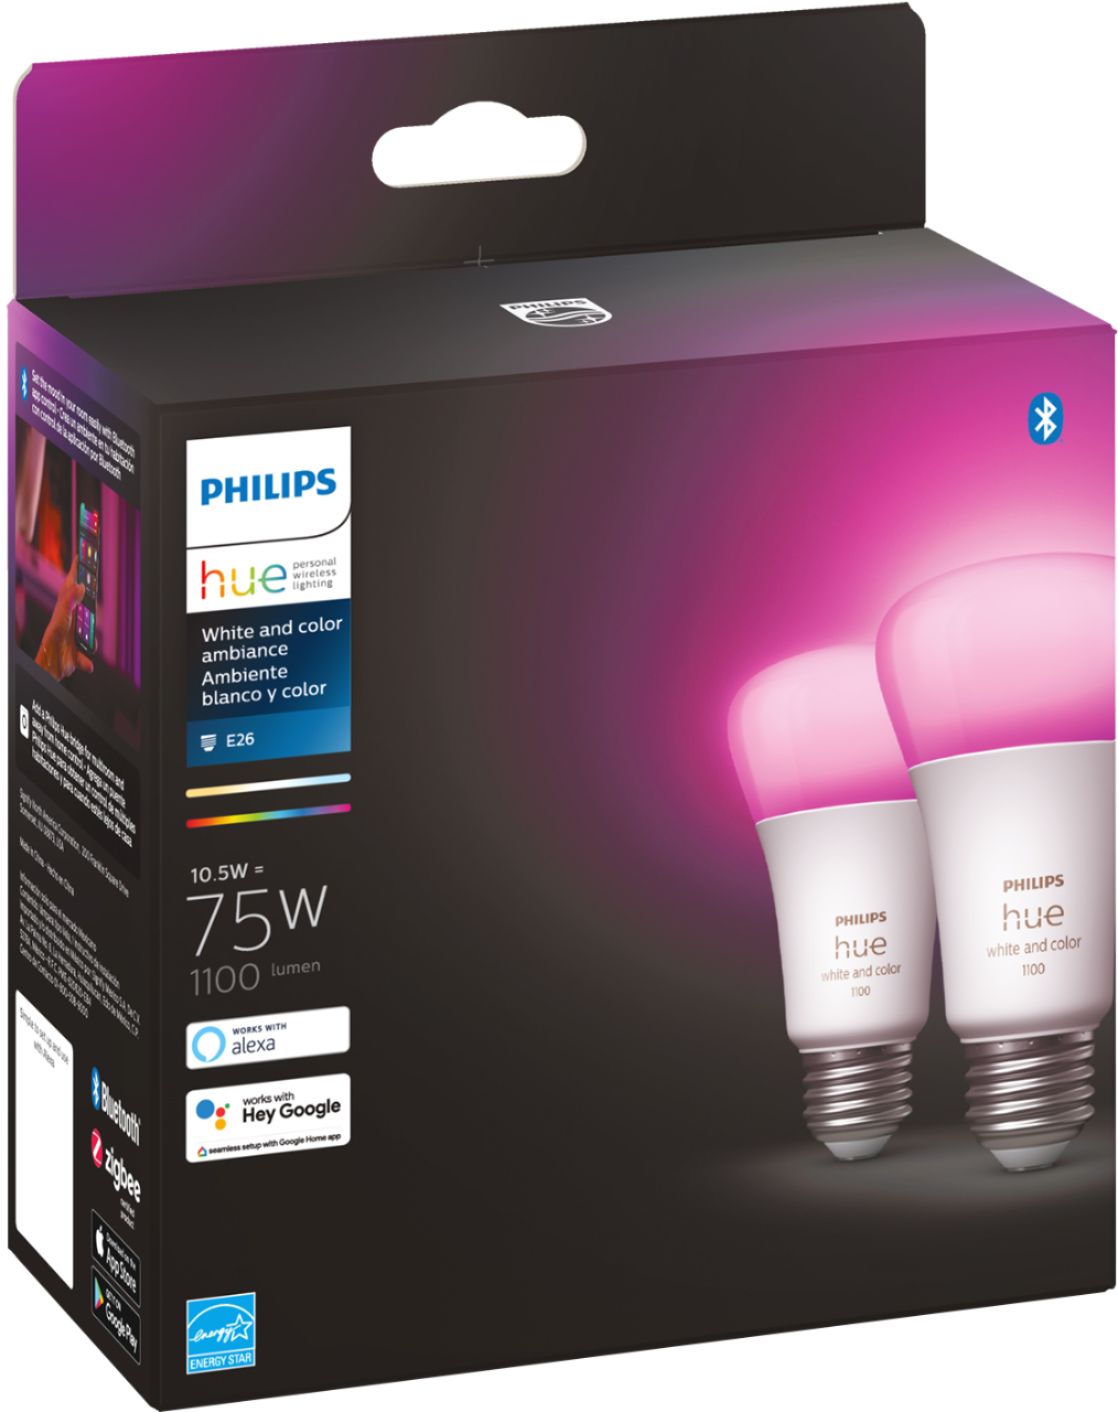 Philips Hue White and Color Ambiance A19 Bluetooth 75W Smart LED Bulb, 2-Pack